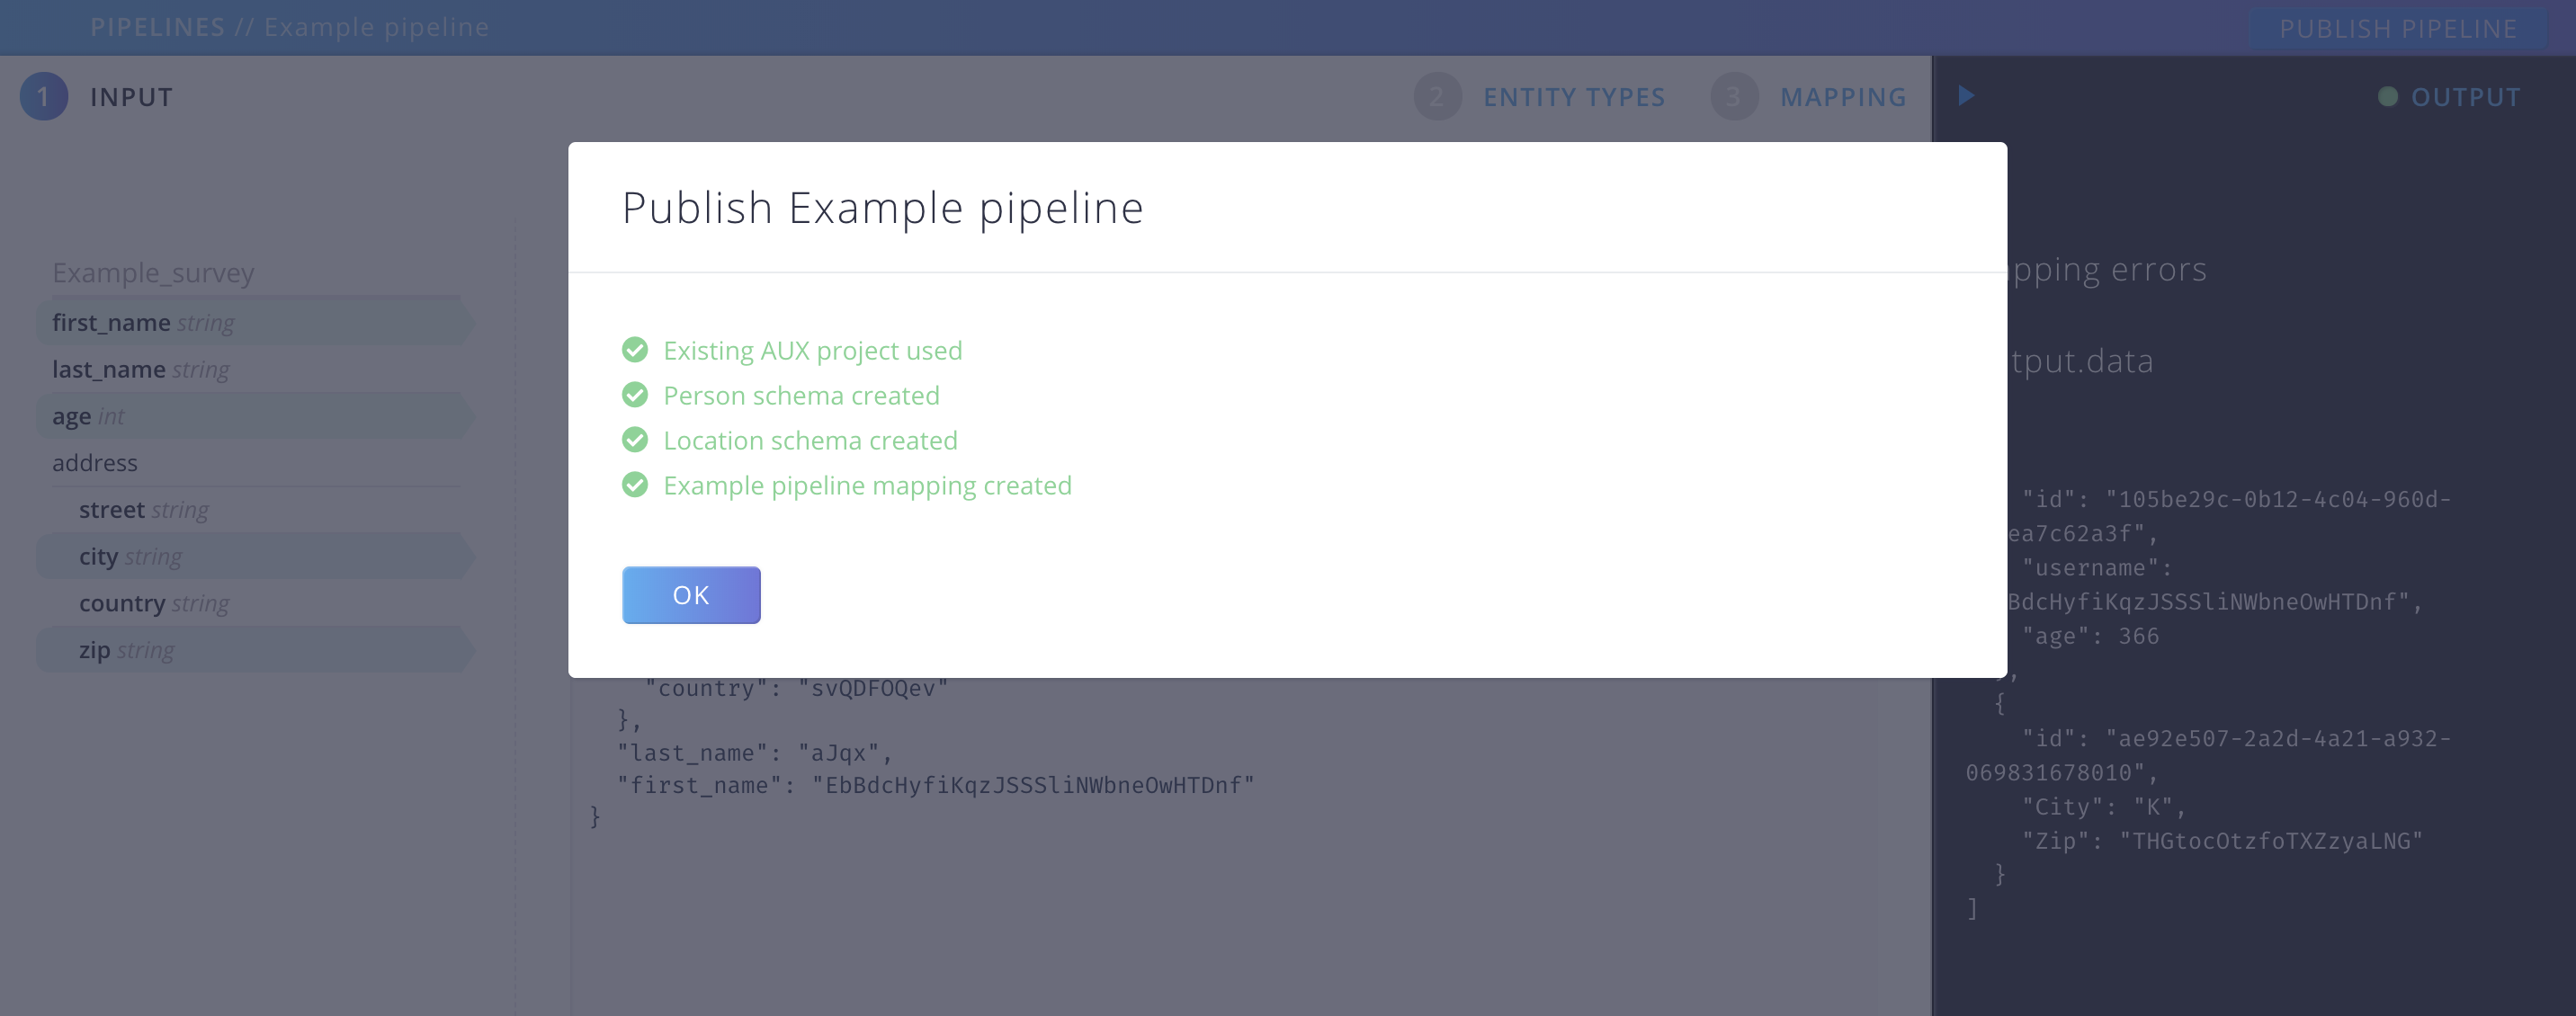 PIPELINE OVERVIEW